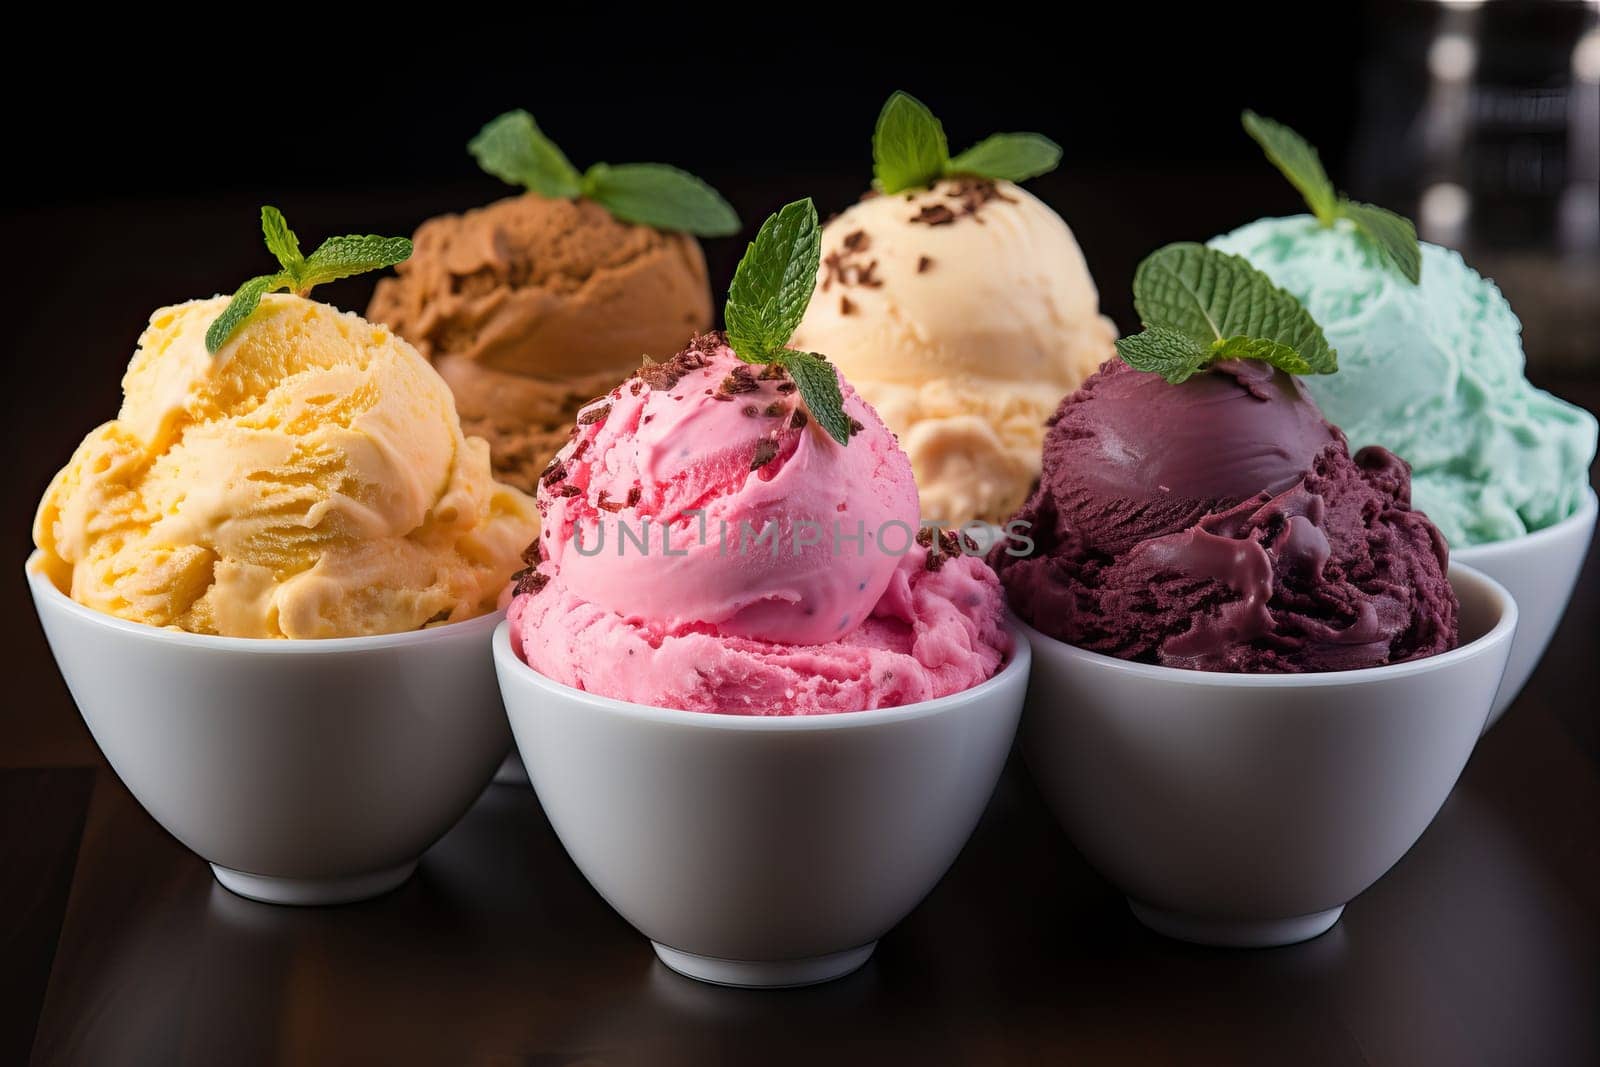 Set of different ice creams in bowls on table, ice cream demonstration before tasting.